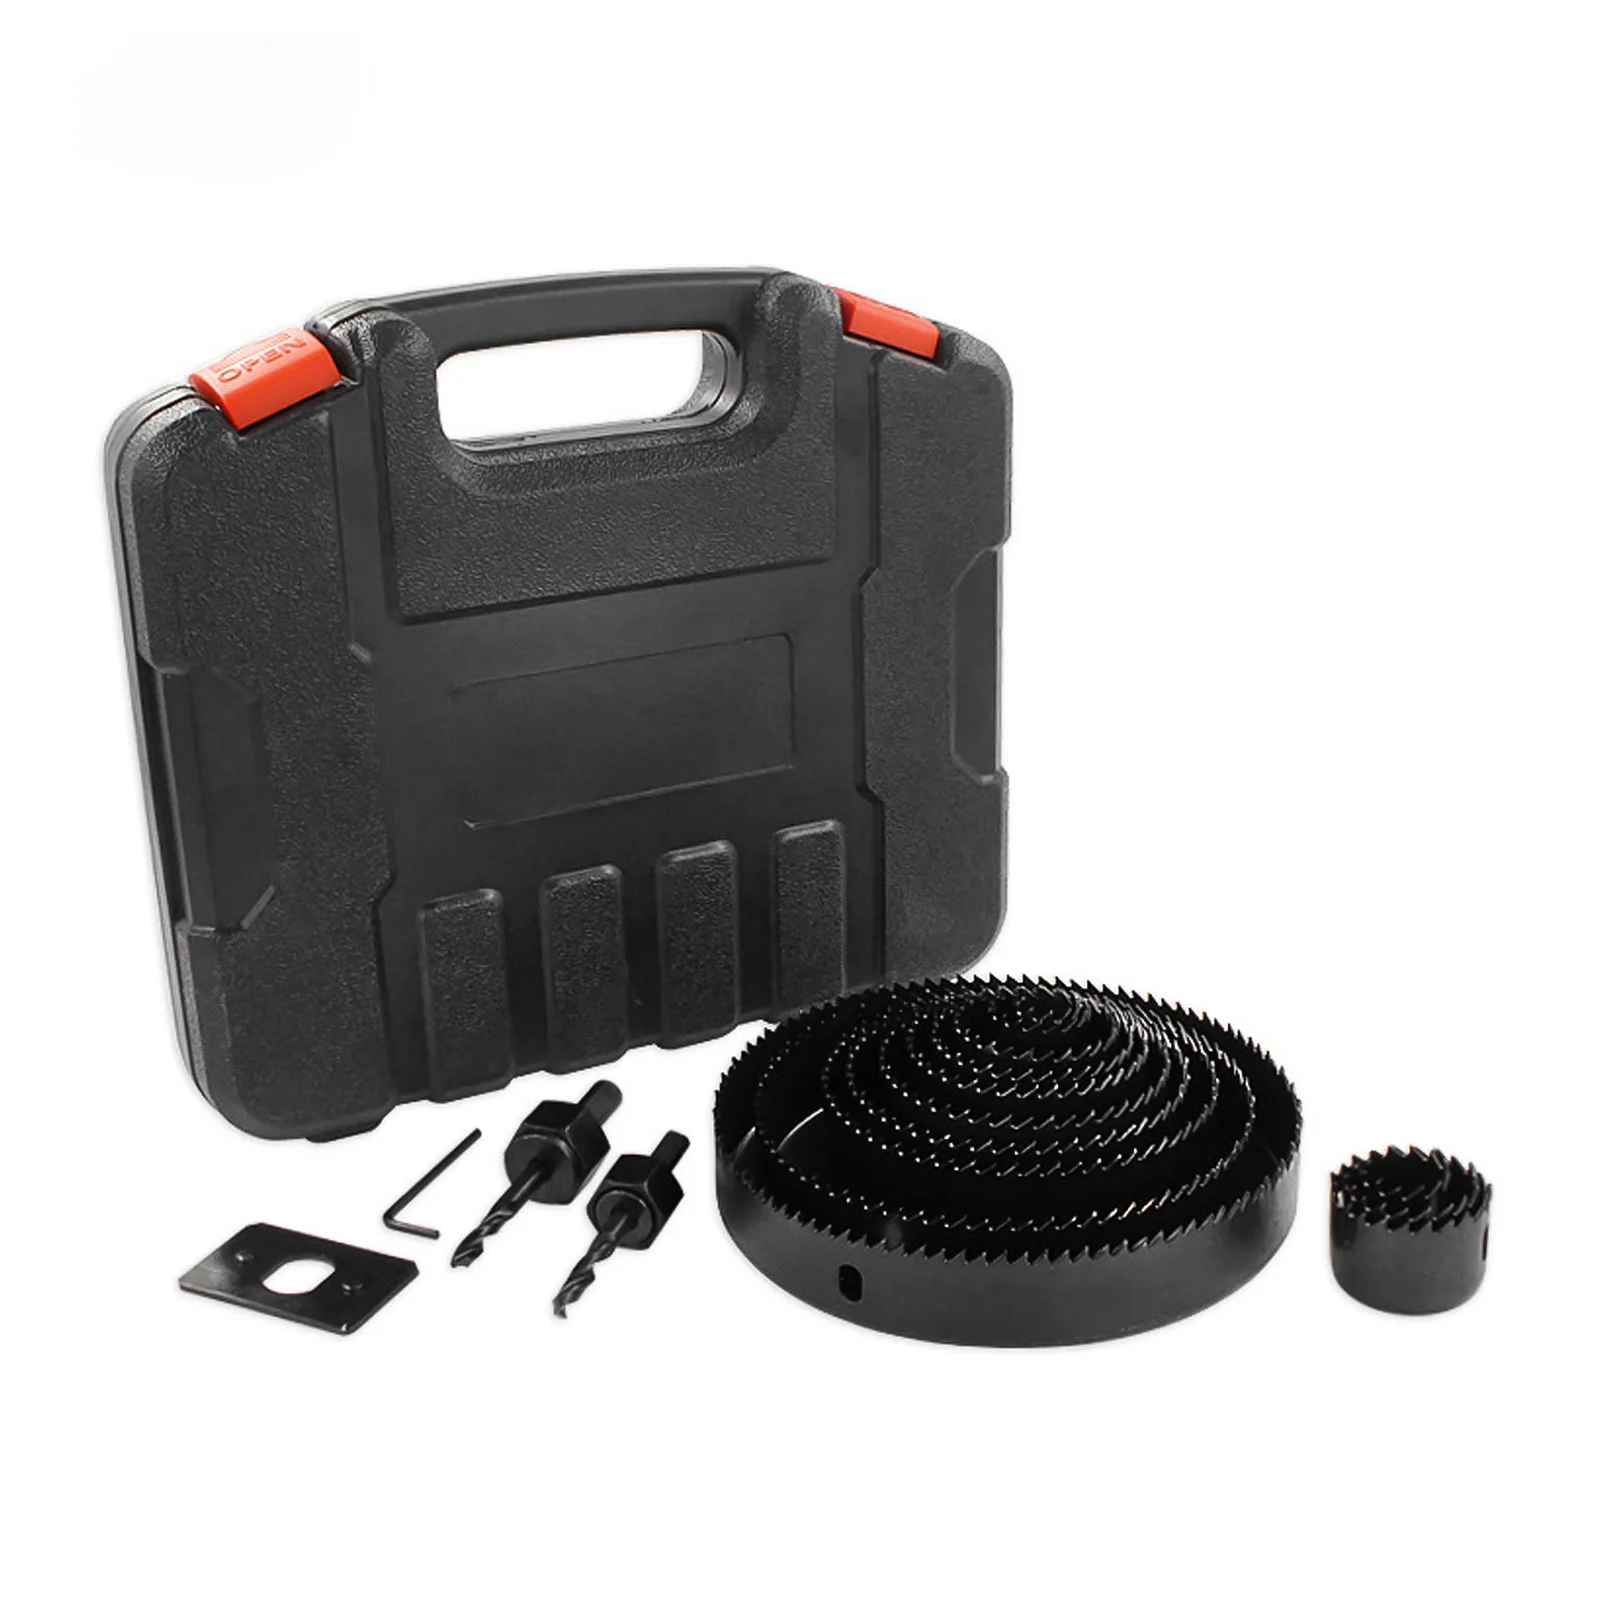 

Hole Saw Kit Including 13pc Saw Blades+2pcs Drill Bits+1 Installation Plate+1 Mini Wrench with Carry Case for Cork Board Plywood